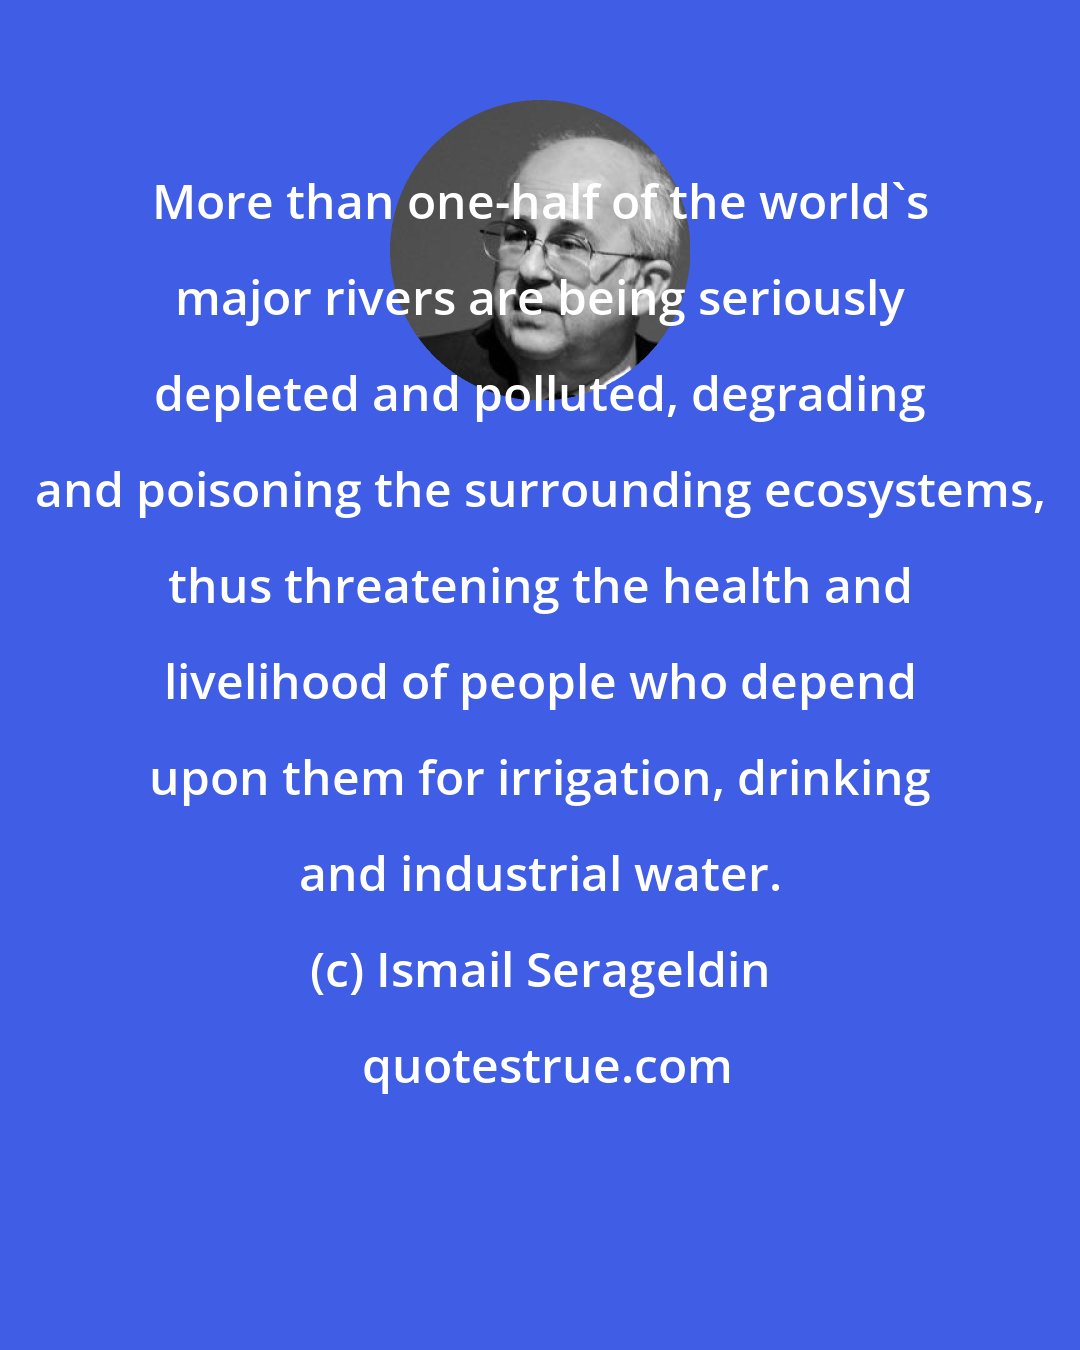 Ismail Serageldin: More than one-half of the world's major rivers are being seriously depleted and polluted, degrading and poisoning the surrounding ecosystems, thus threatening the health and livelihood of people who depend upon them for irrigation, drinking and industrial water.